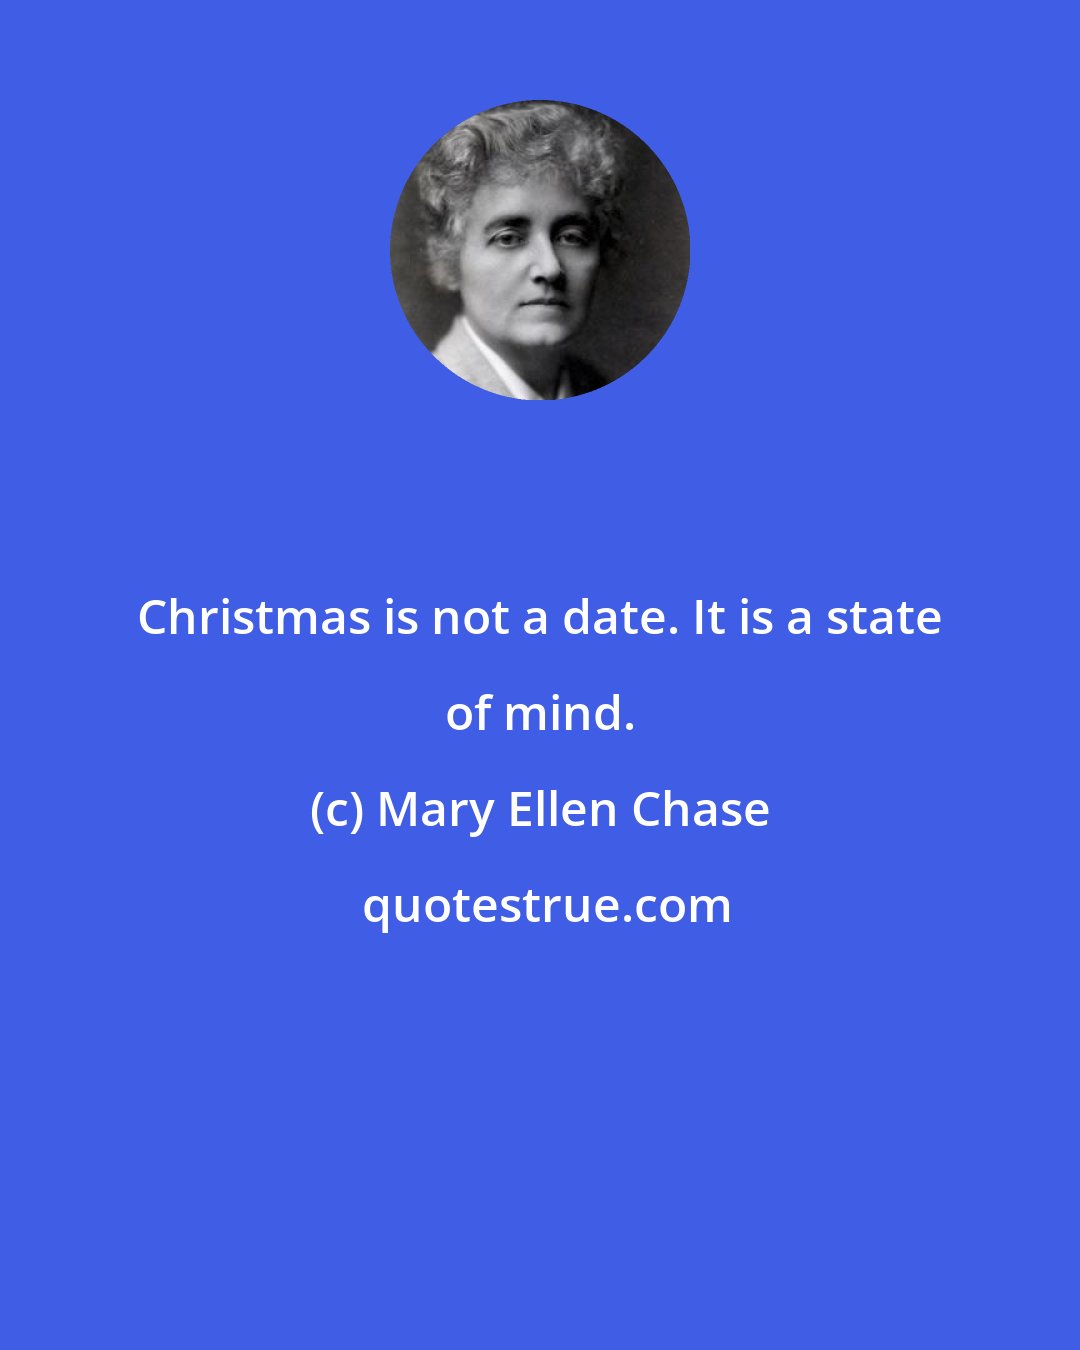 Mary Ellen Chase: Christmas is not a date. It is a state of mind.